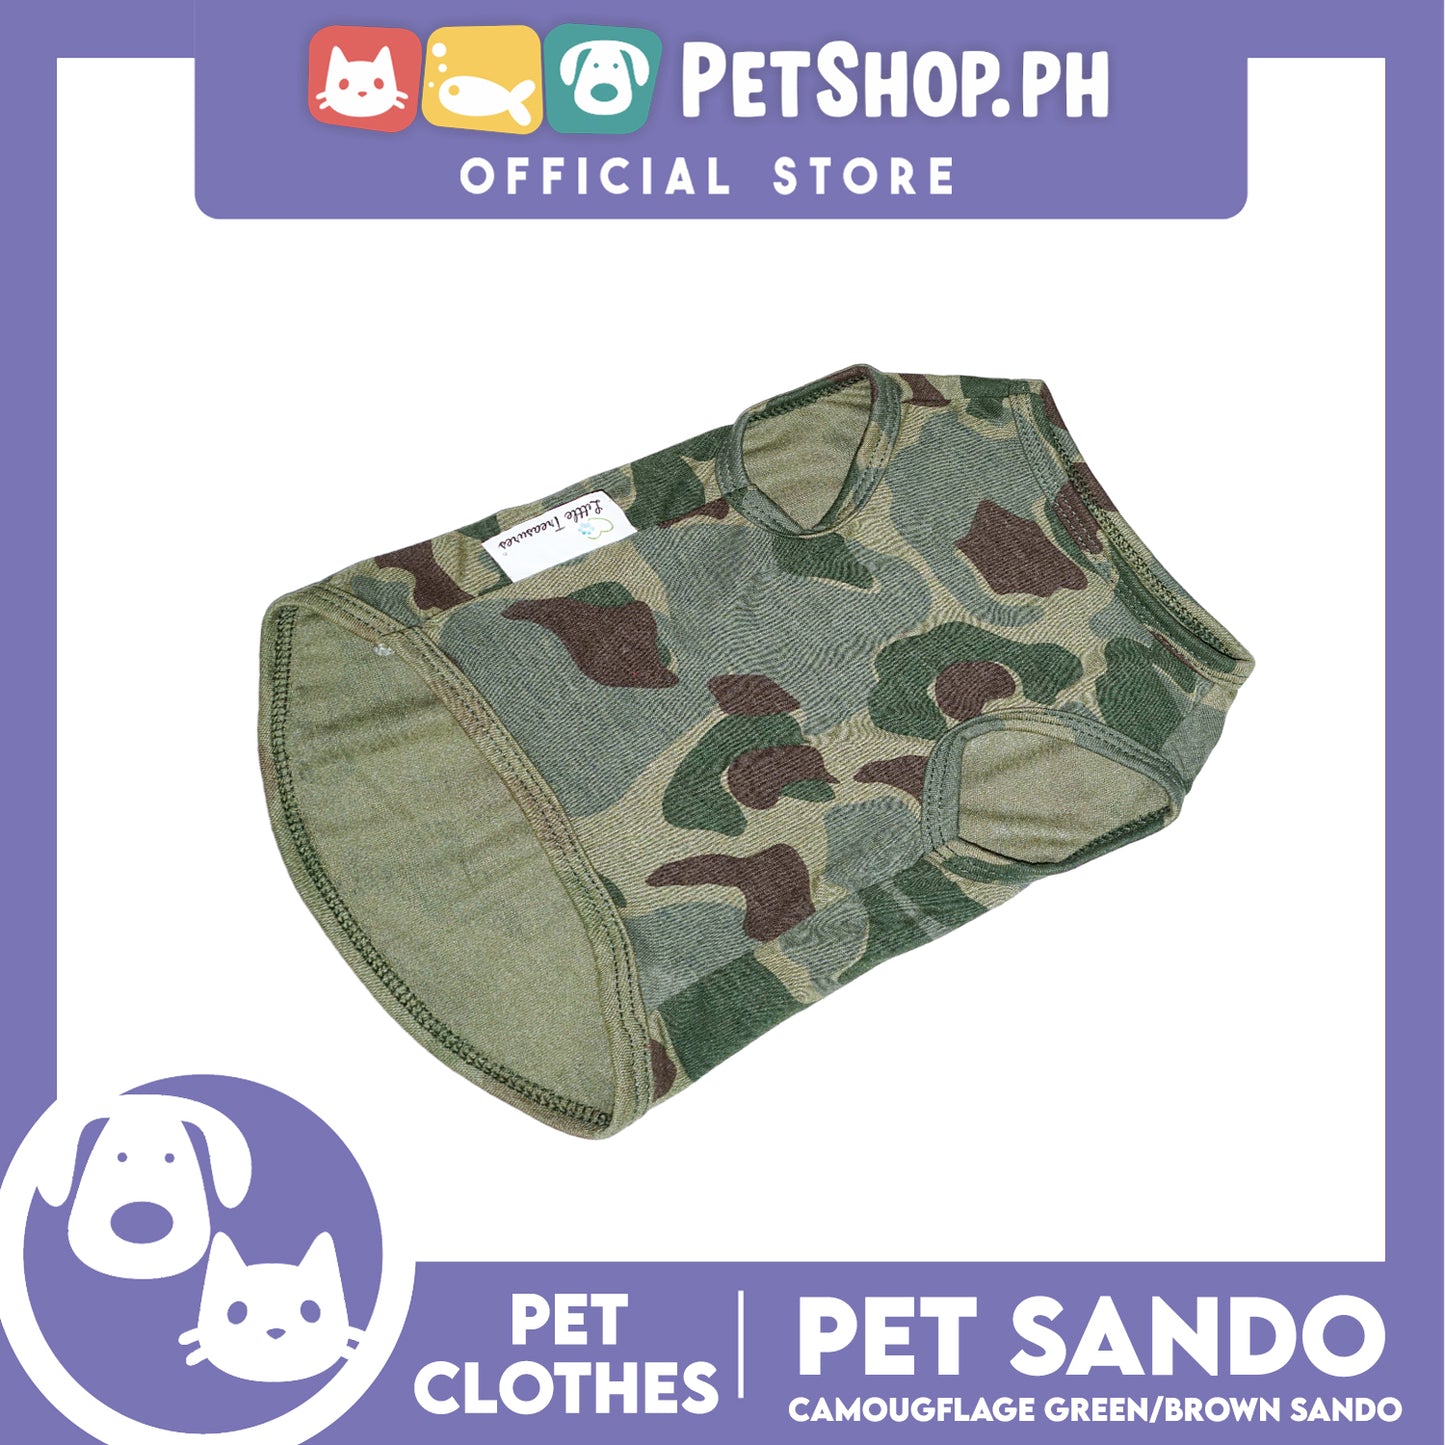 Pet Sando Camouflage Green and Brown (Extra Large) Perfect Fit for Dogs and Cats